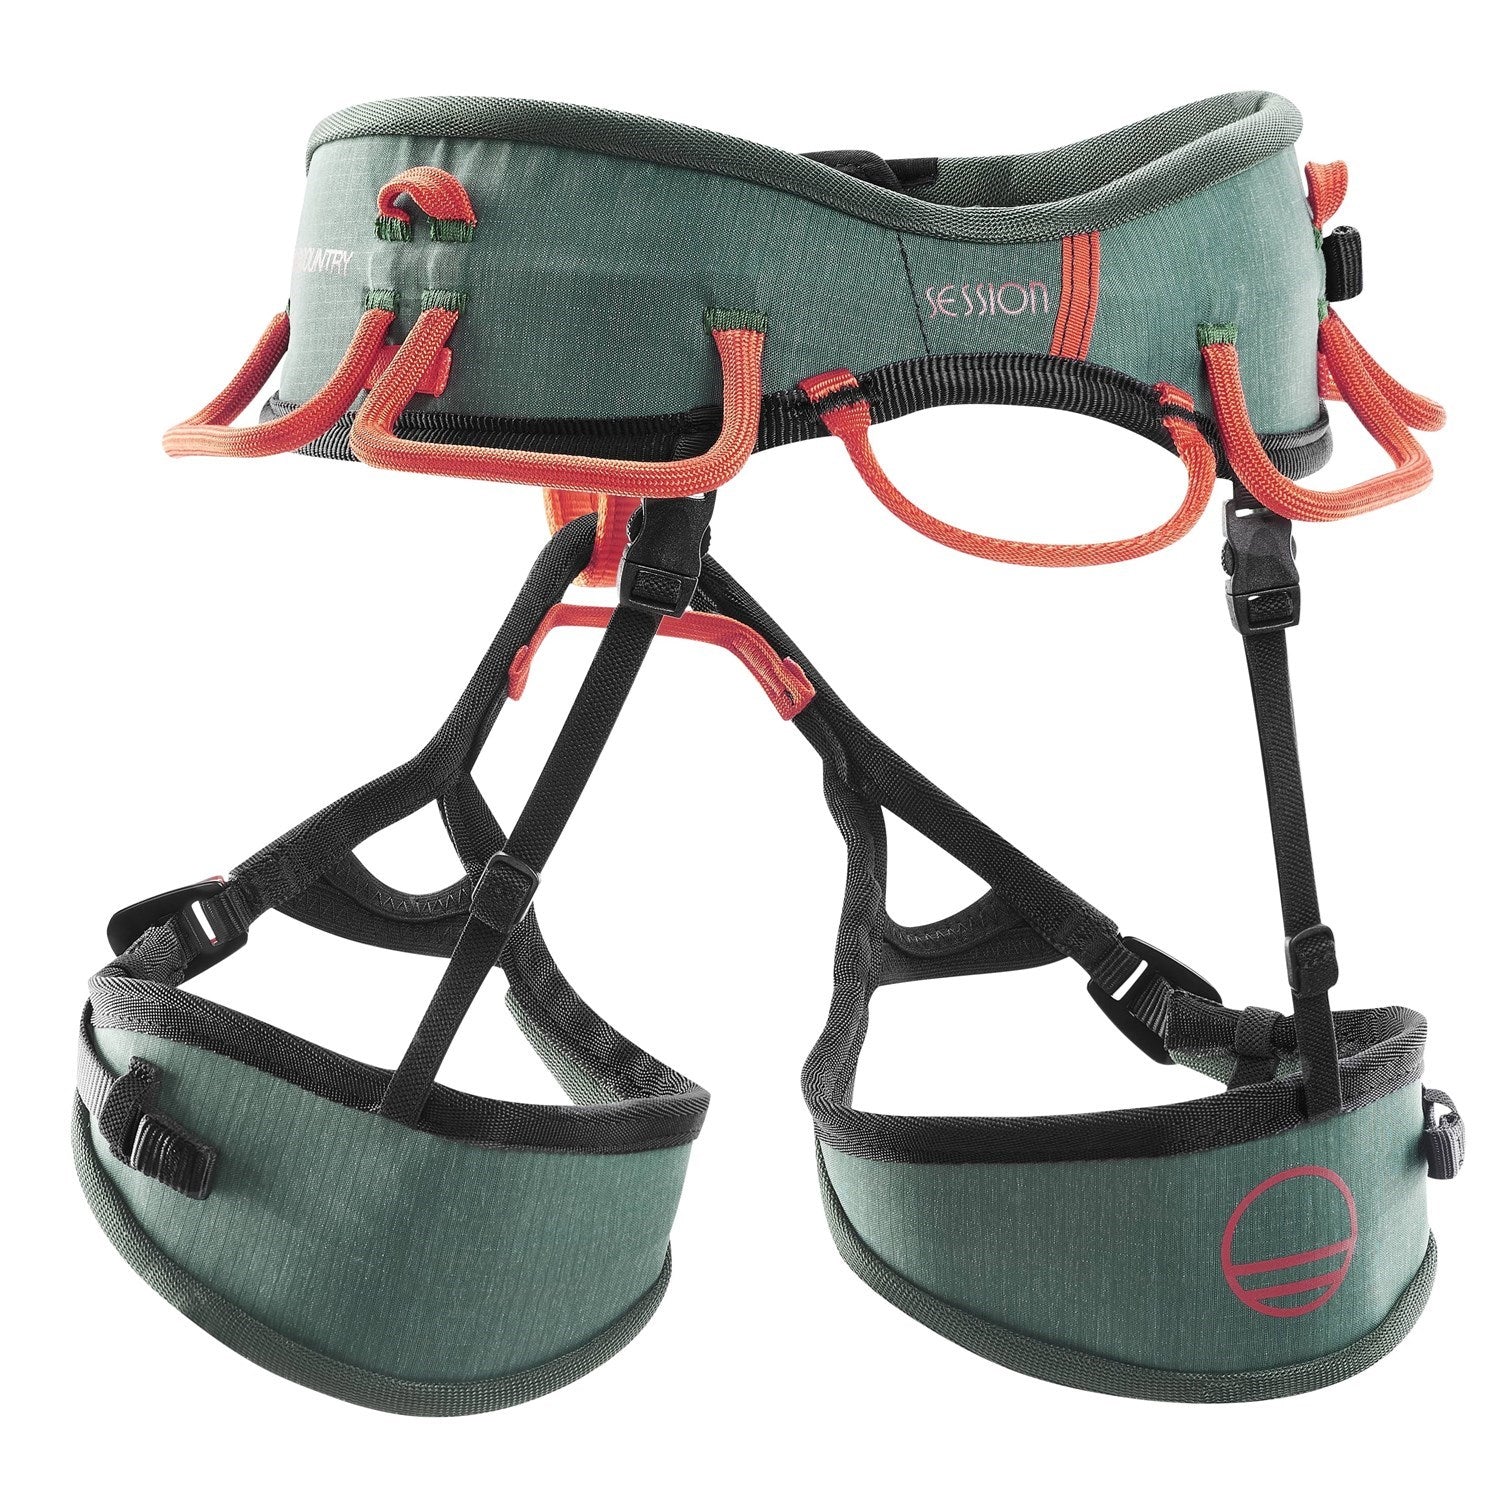 Wild Country Session Harness in green showing front belay loop